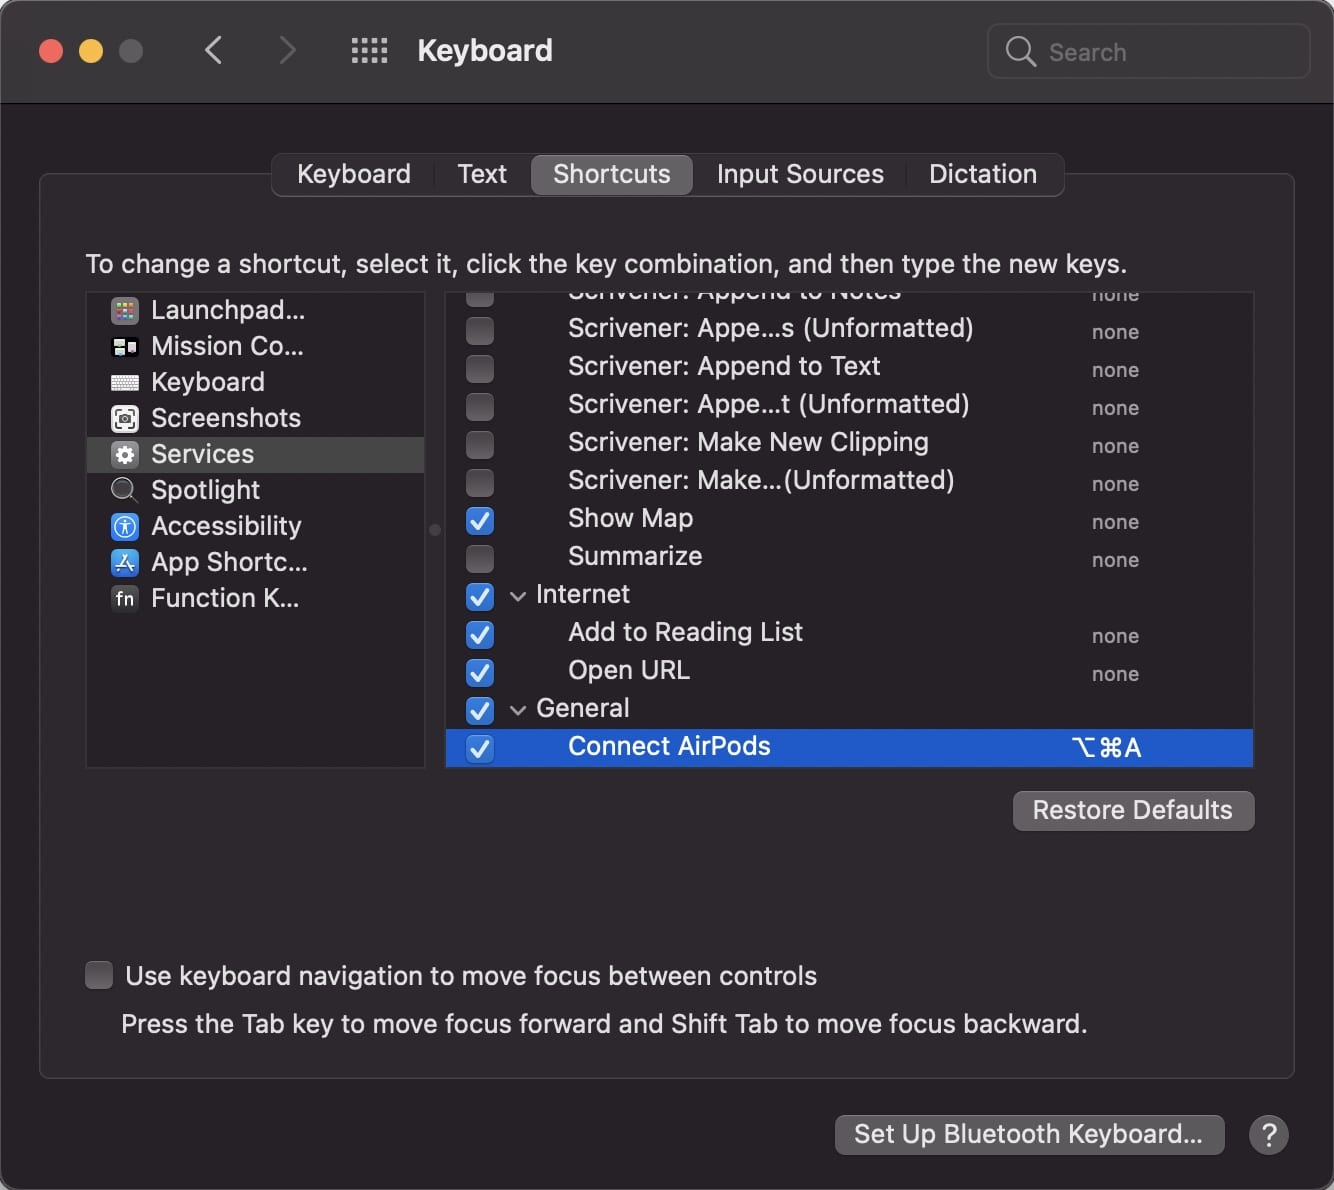 The Keyboard preferences pane, showing the Shortcut panel, and a "Connect AirPods" Quick Action highlighted under Services.